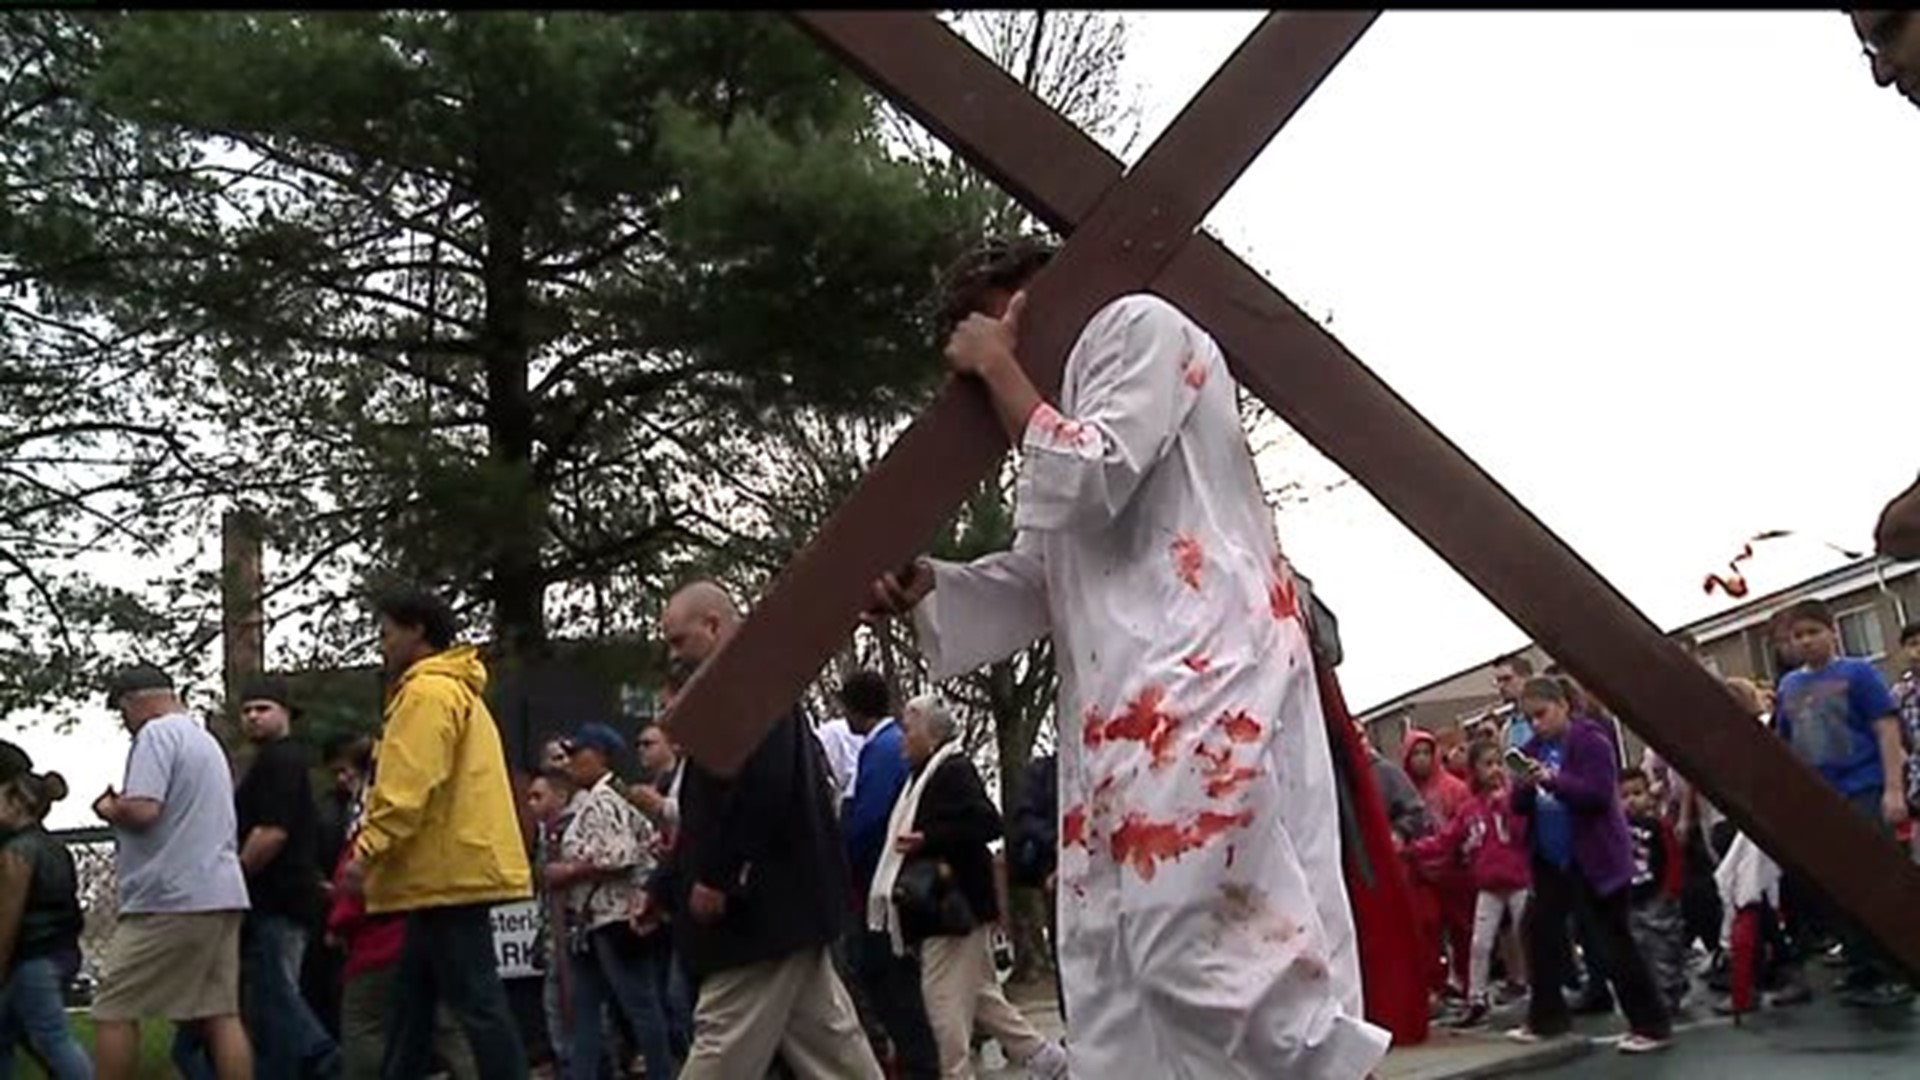 Local church brings Stations of the Cross to Lancaster city streets in honor of Good Friday